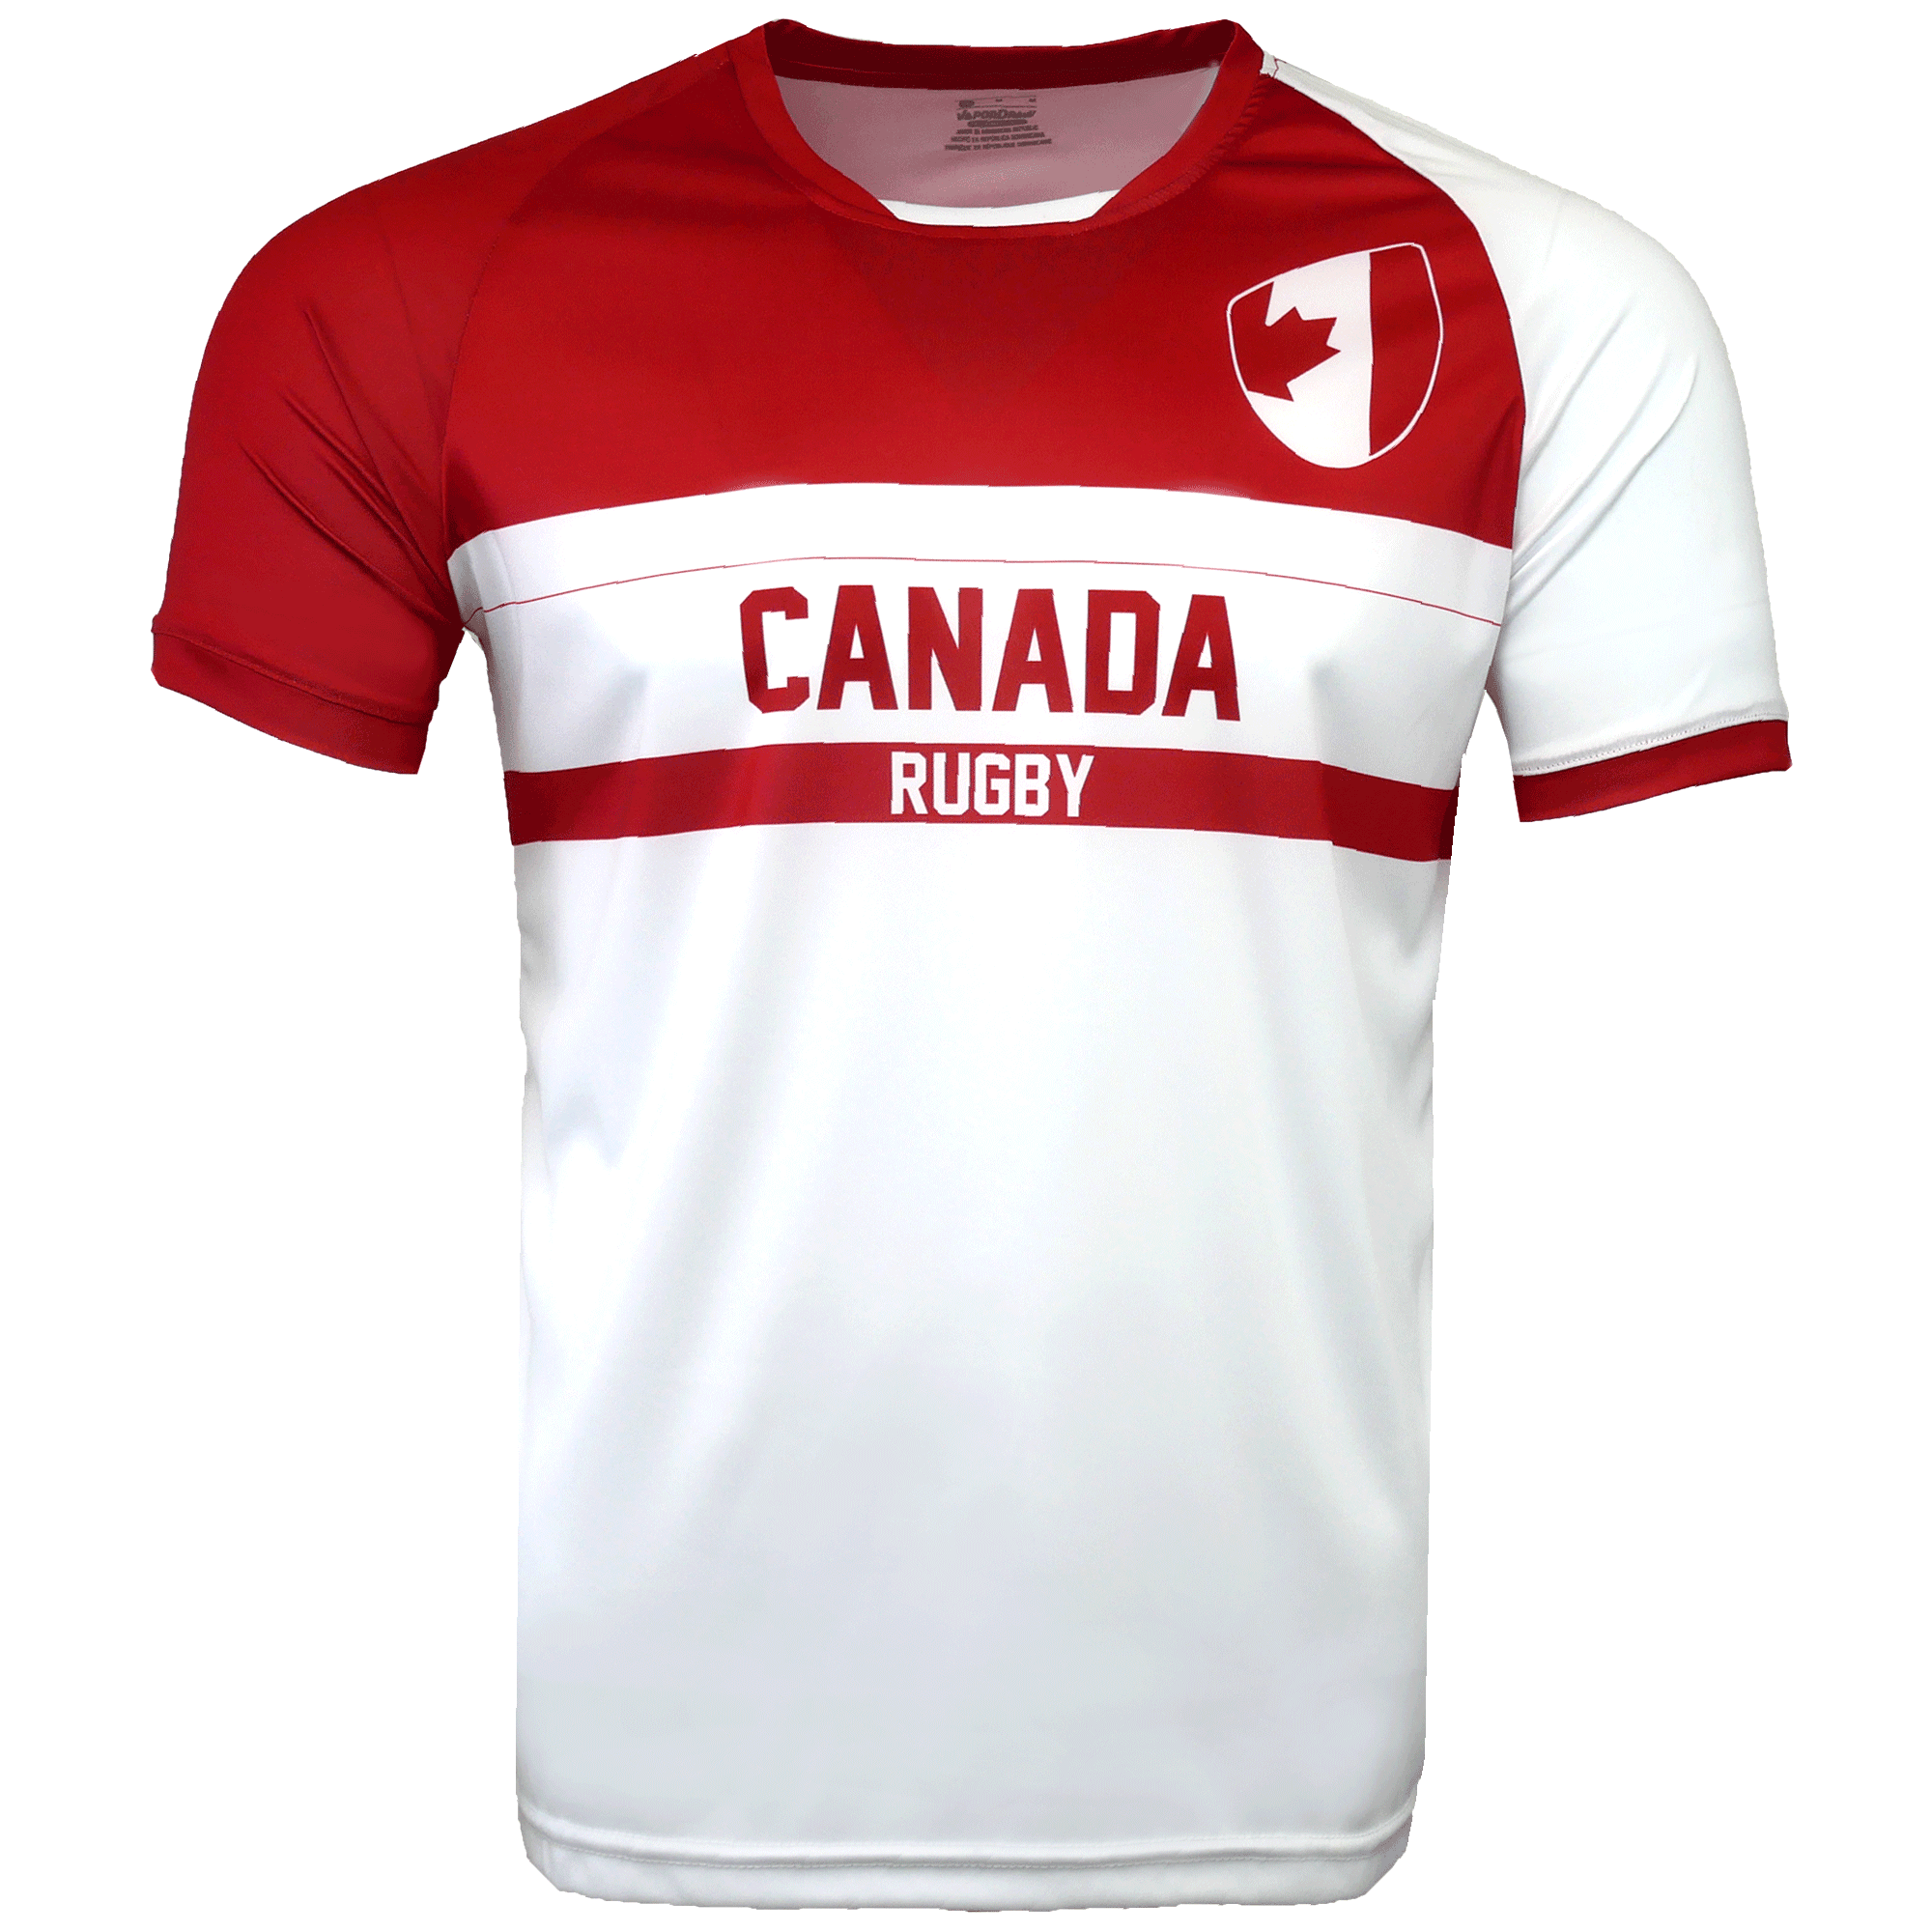 Nations of Rugby Canada Rugby Supporters Jersey